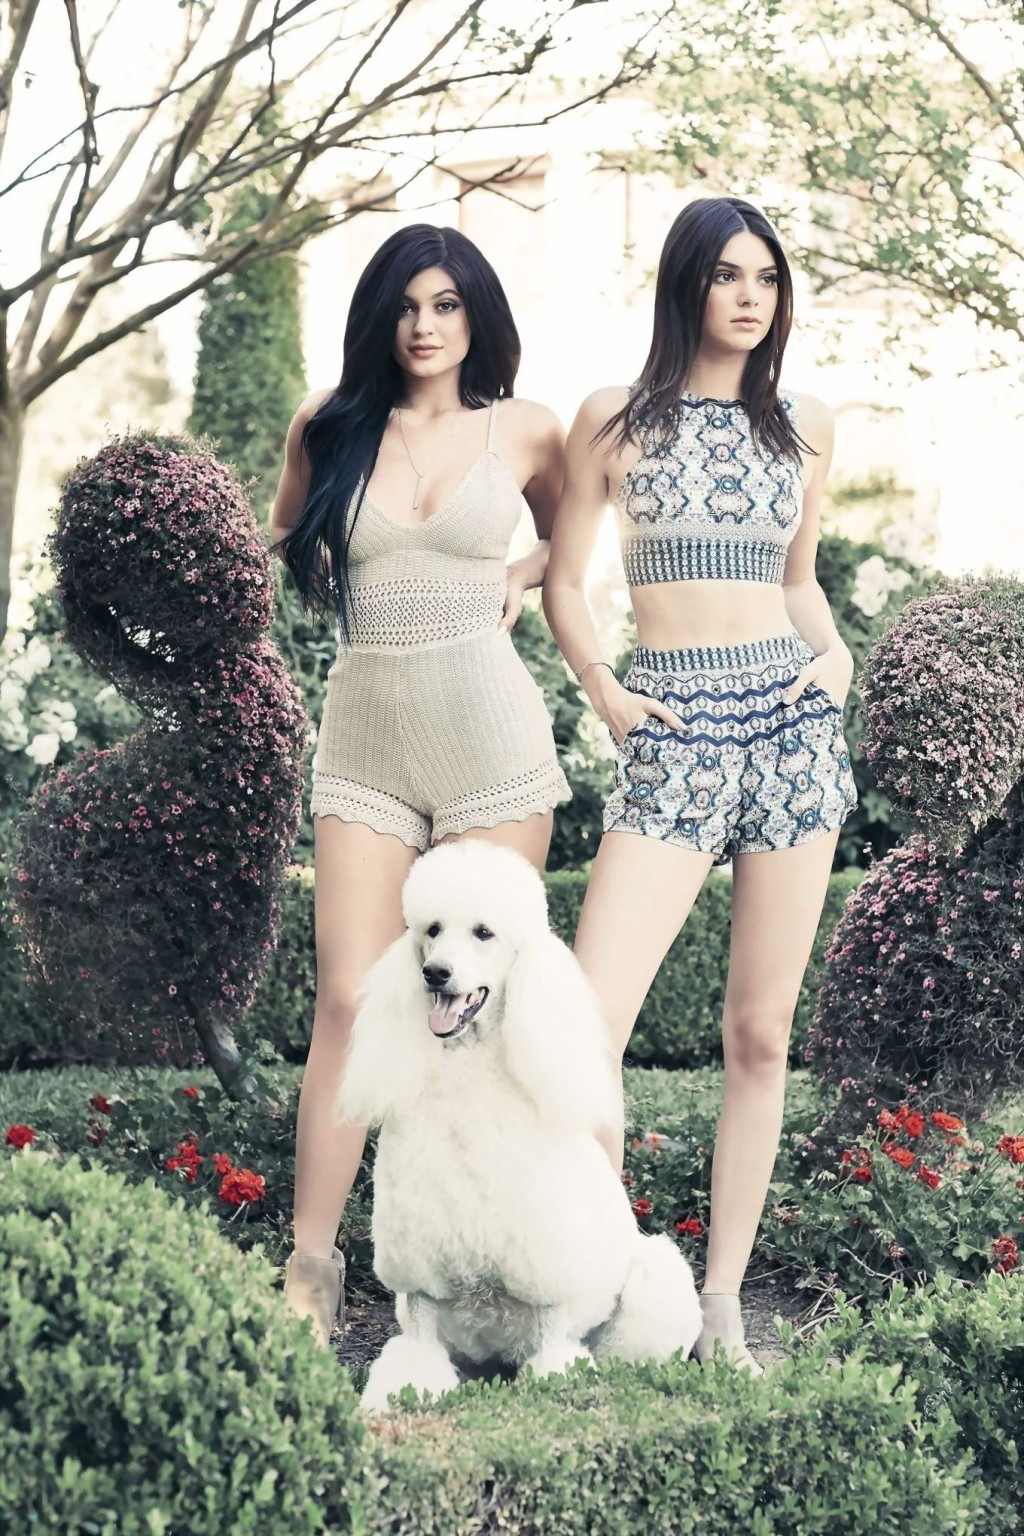 Kendall and Kylie Jenner posing in bikini and tiny outfit for their PacSun Summe #75162974